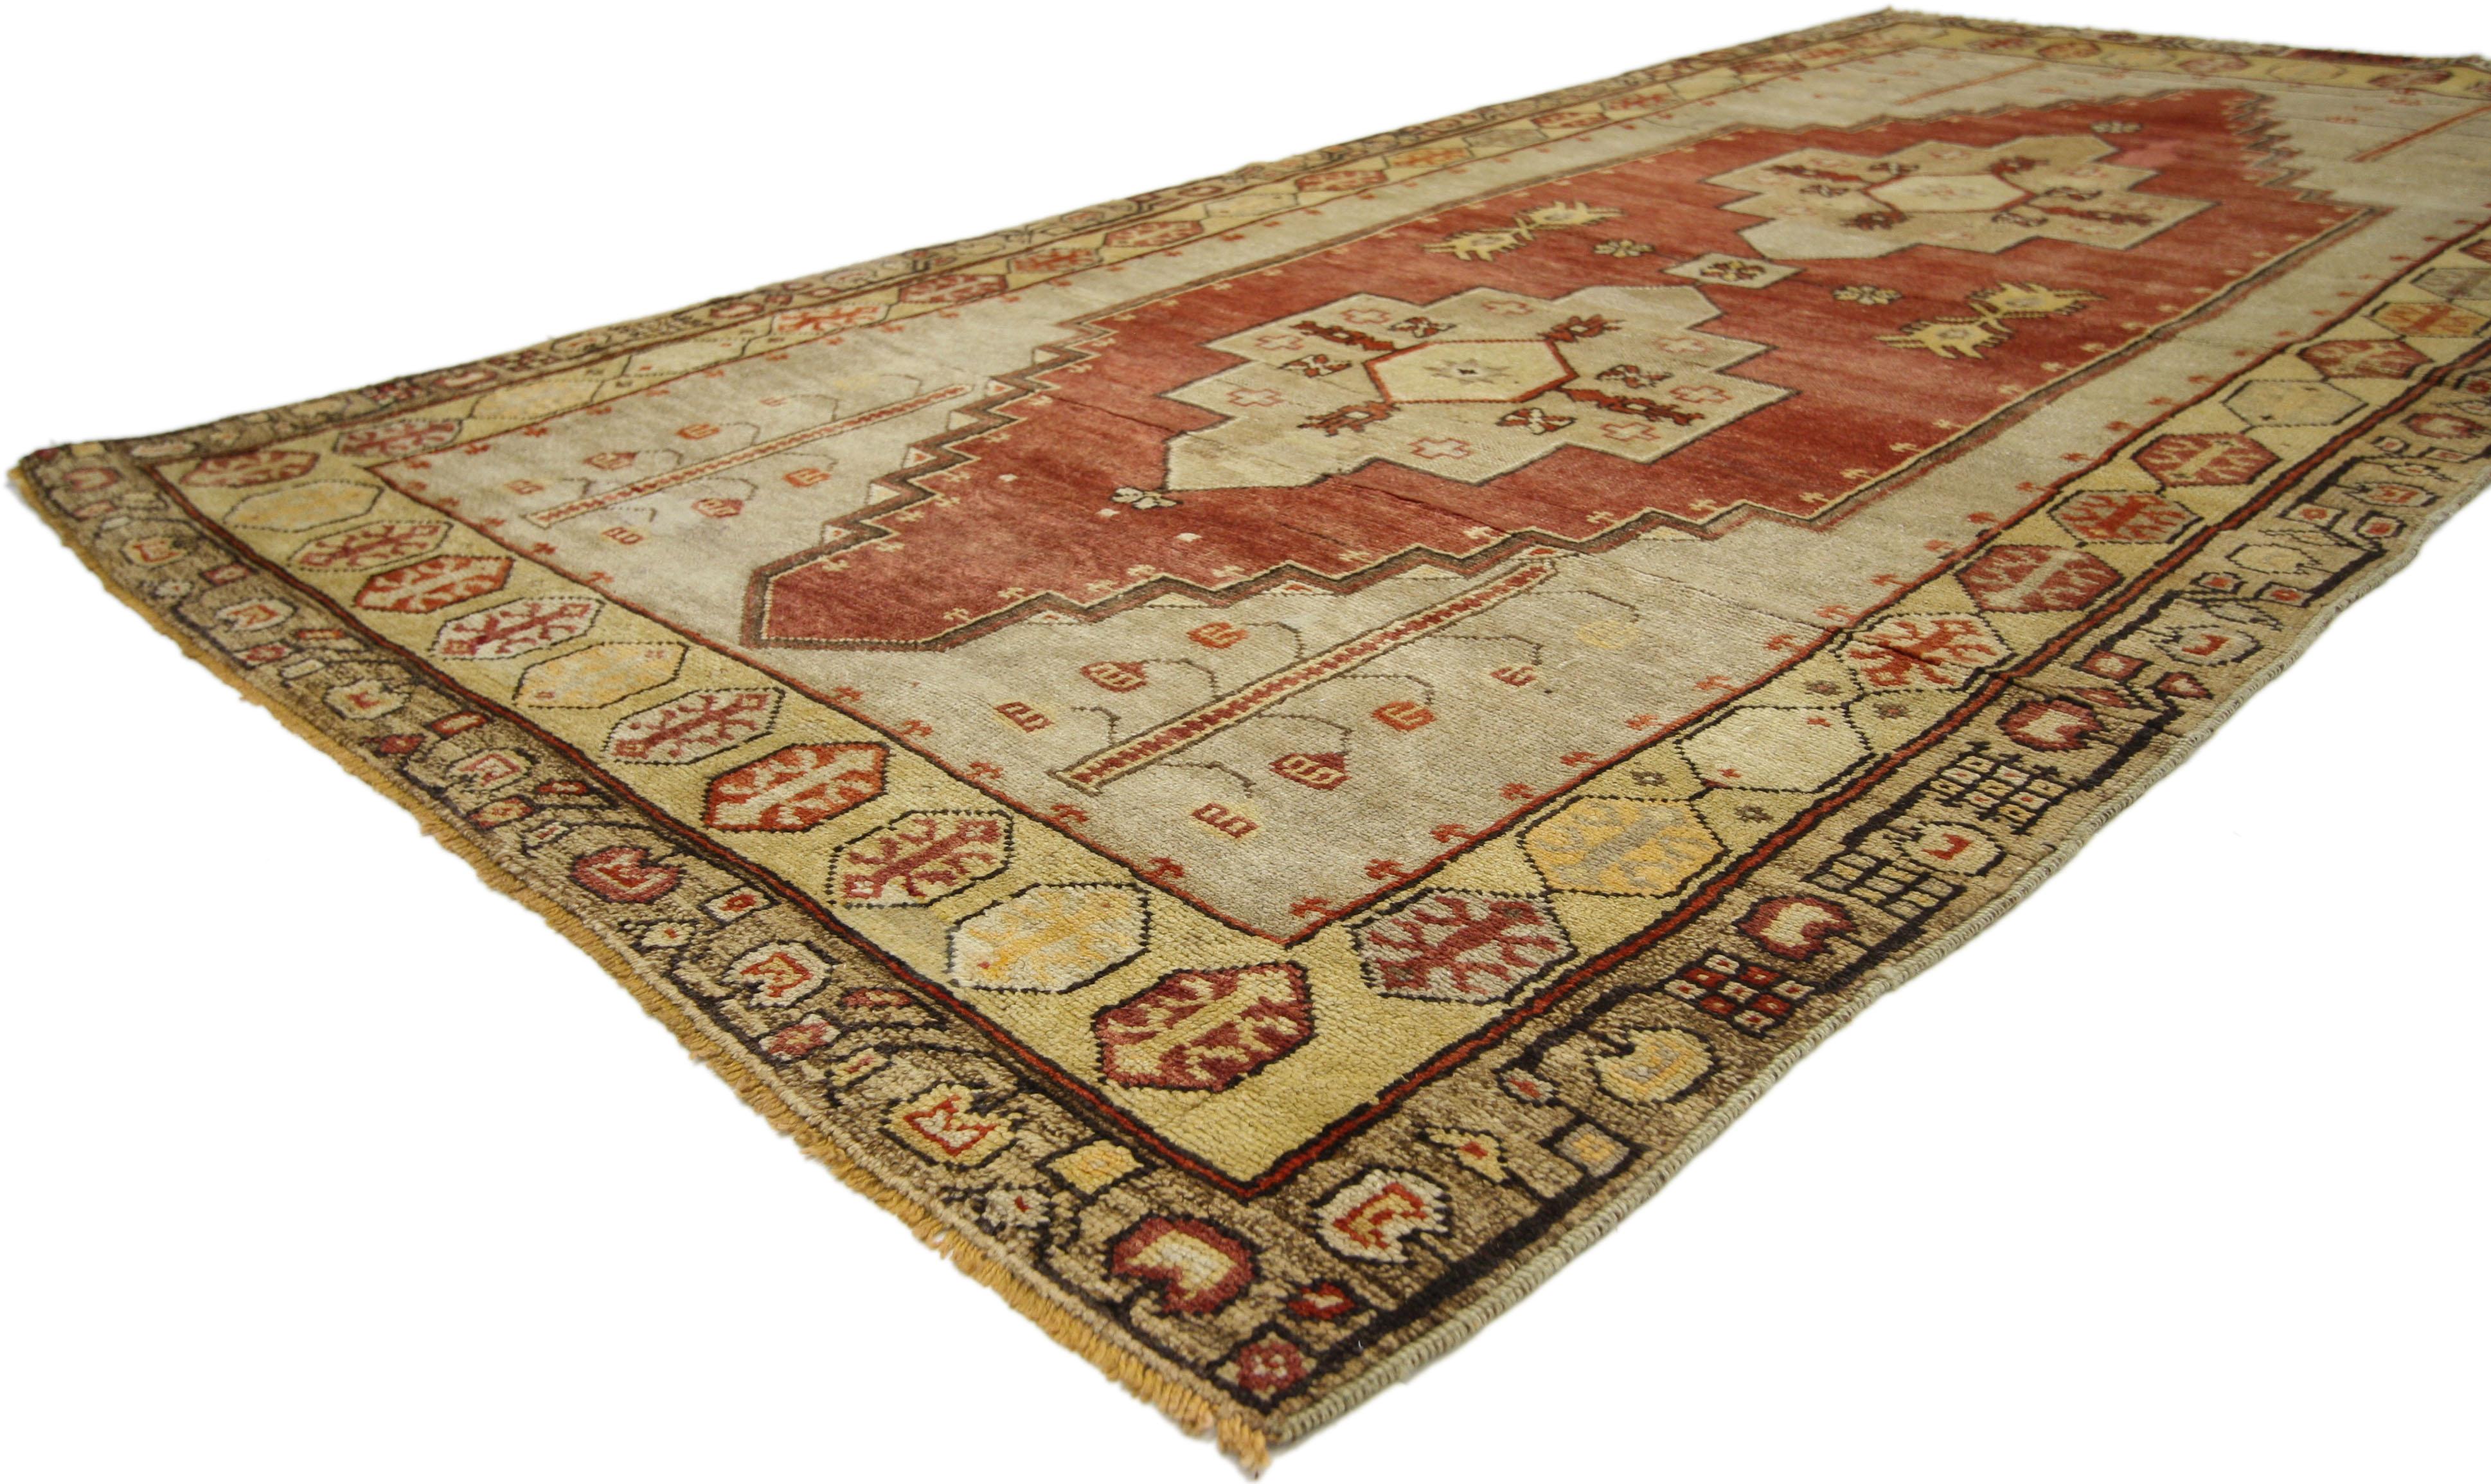 50643, vintage Turkish Oushak rug with Mid-Century Modern Tribal style. This hand knotted wool vintage Turkish Oushak rug features two connected stepped medallions filled with rosettes, crosses, and eight-point stars. The double medallion is dotted